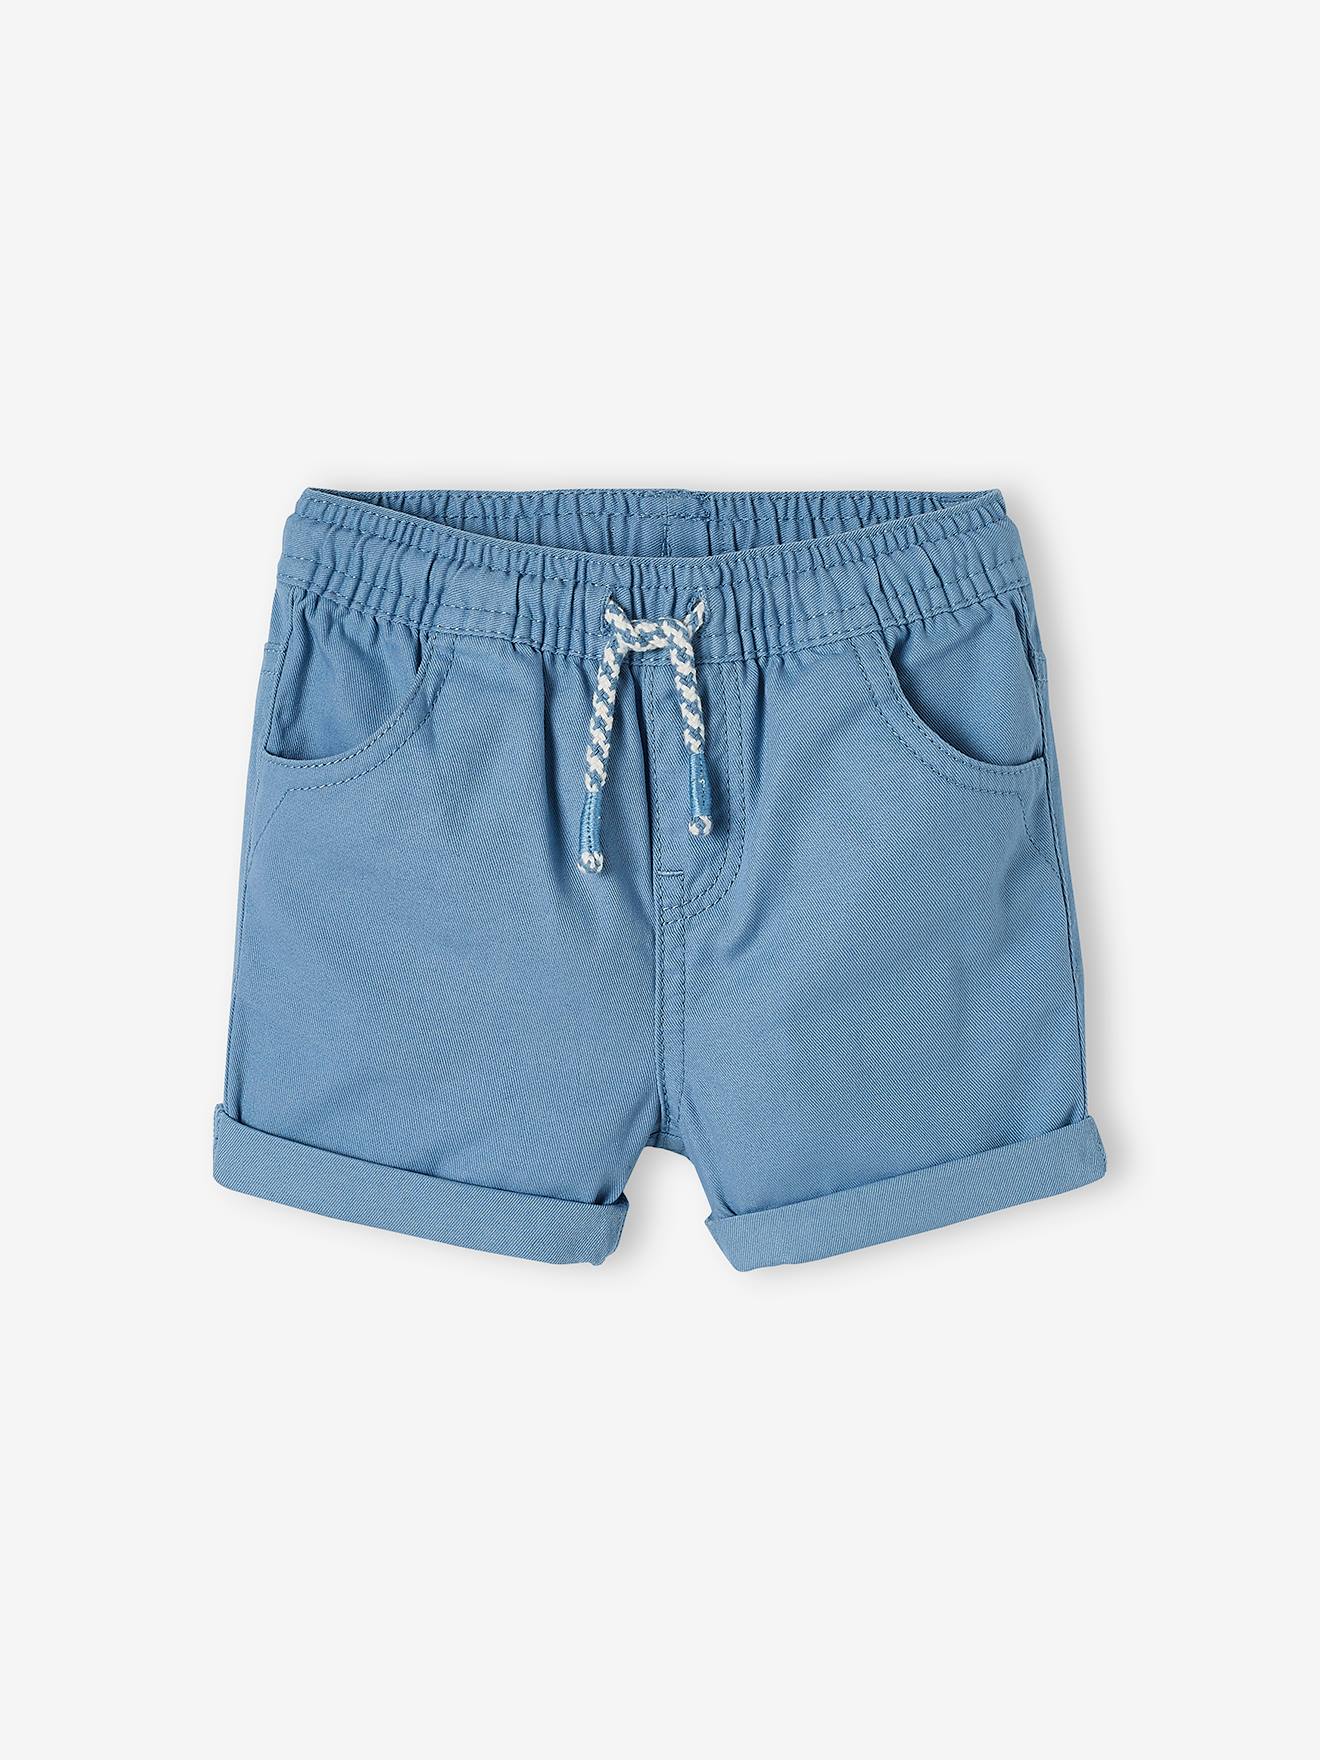 Pack of 3 Simple Joys by Carter's Baby Boy’s Cotton Shorts